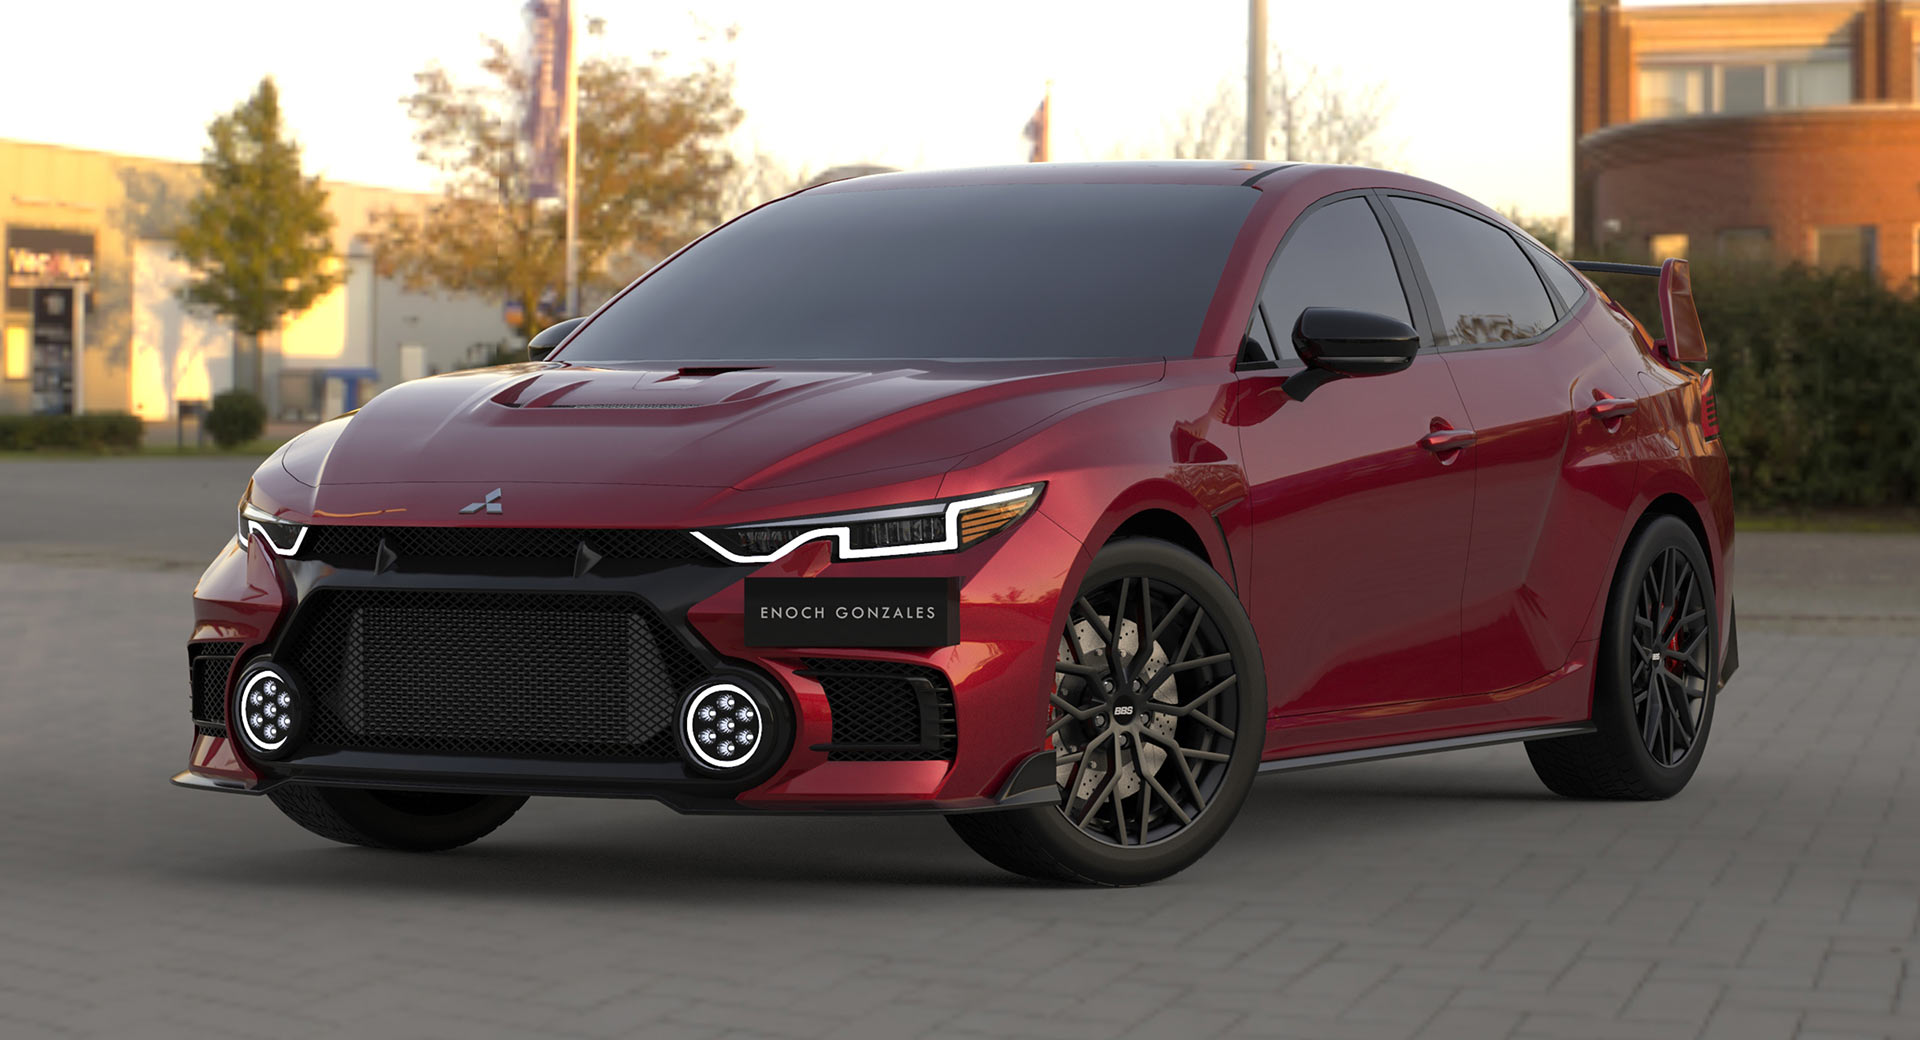 2023 Mitsubishi Lancer EVO XI appears as a modified Audi RS 3  Digital  Particleboard